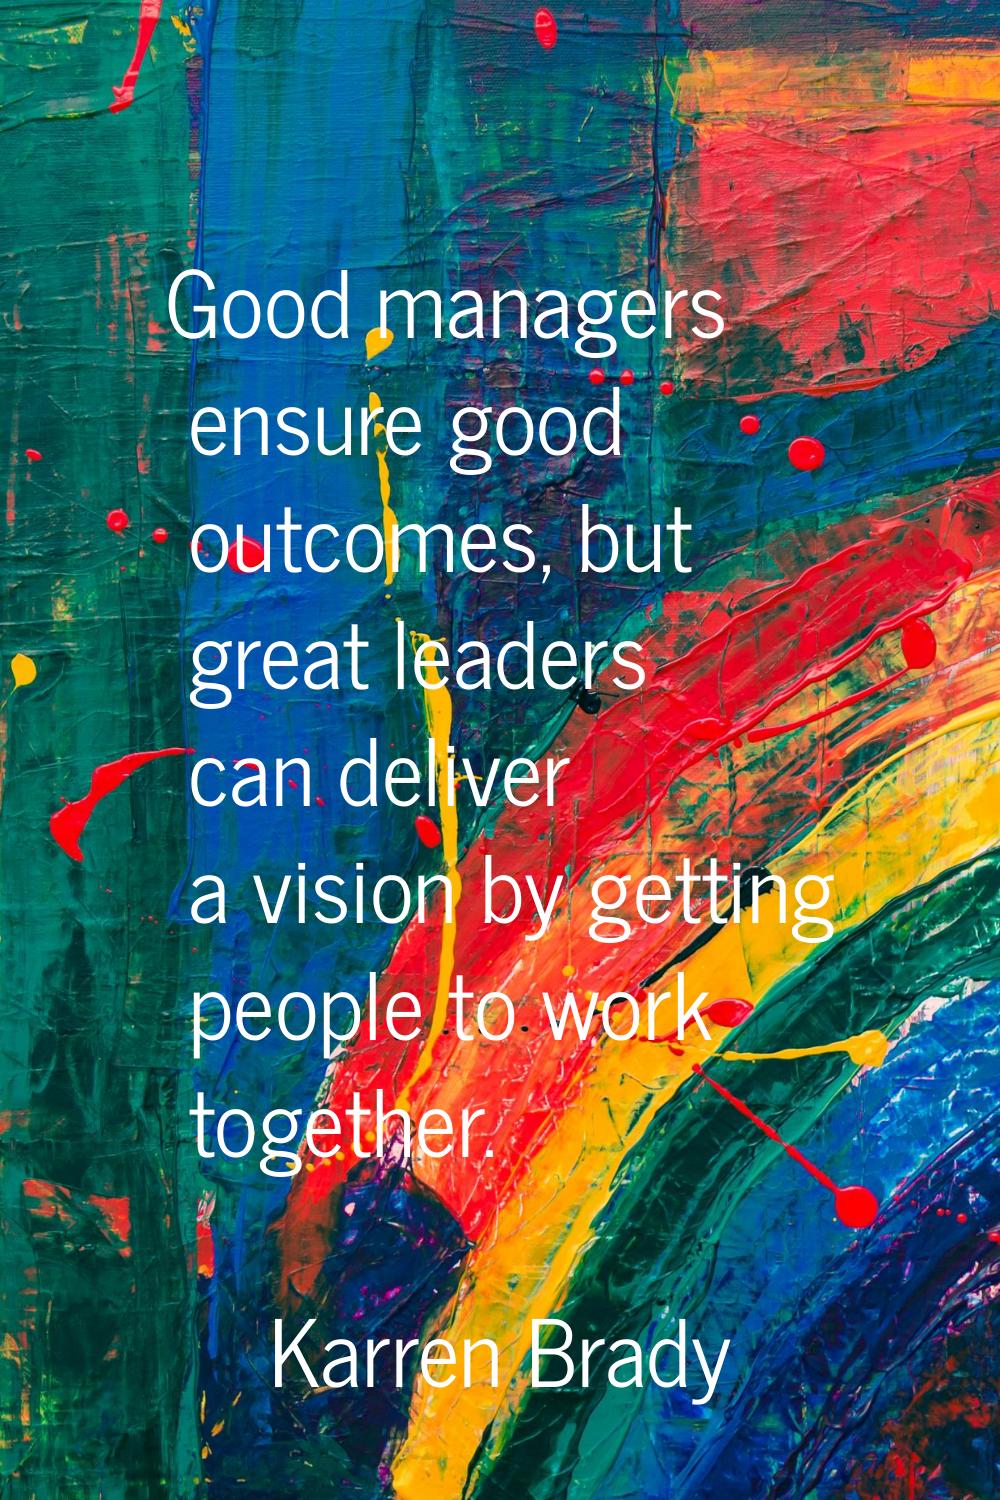 Good managers ensure good outcomes, but great leaders can deliver a vision by getting people to wor